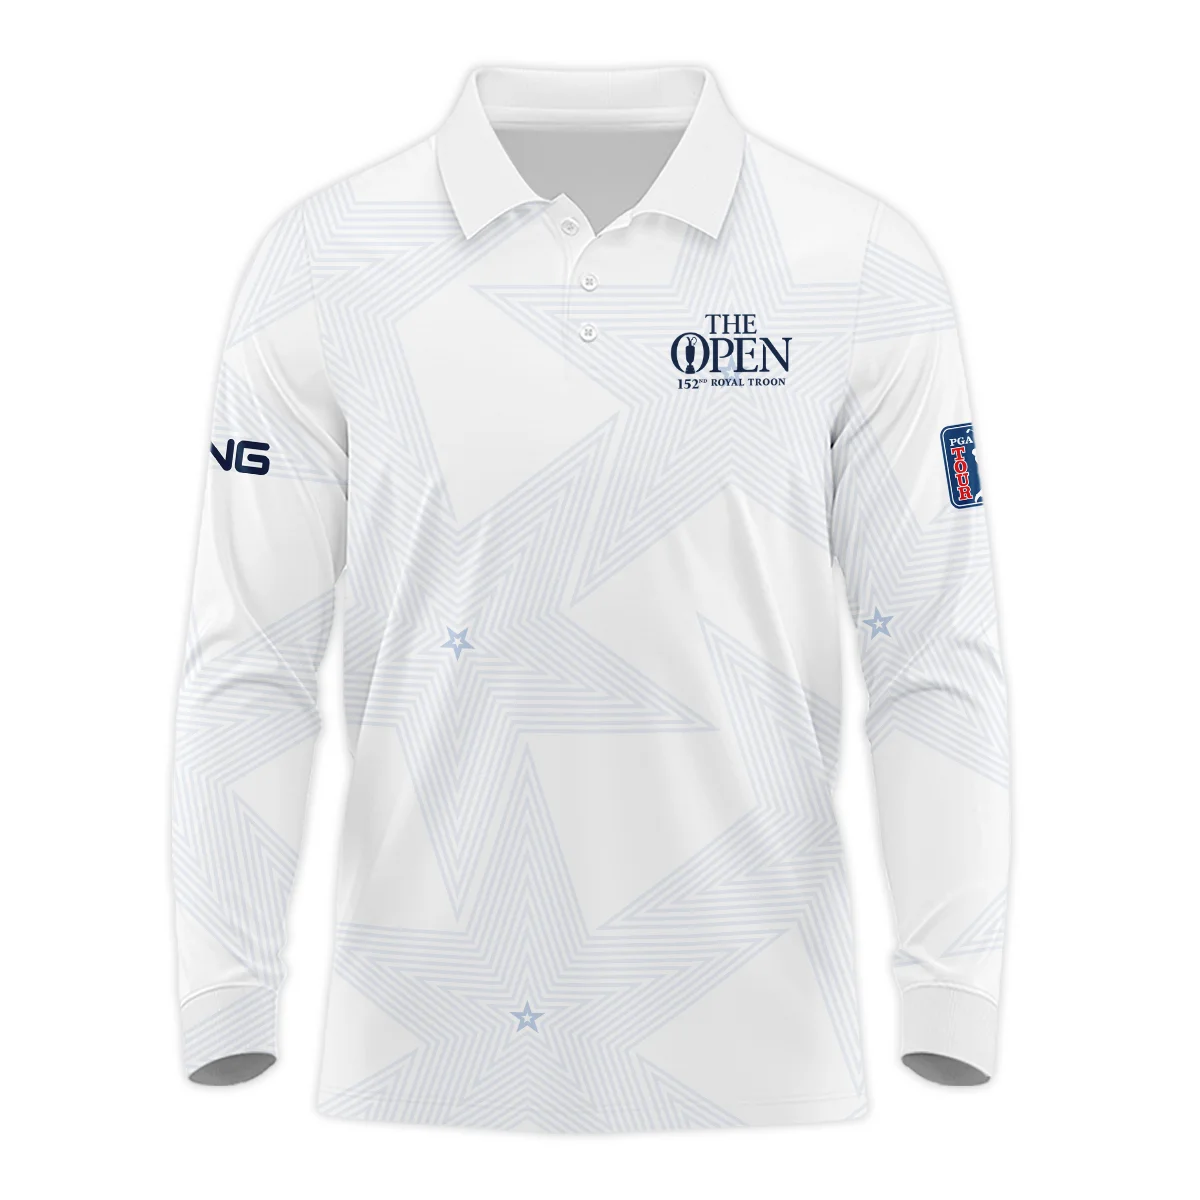 152nd The Open Championship Golf Ping Polo Shirt Stars White Navy Golf Sports All Over Print Polo Shirt For Men